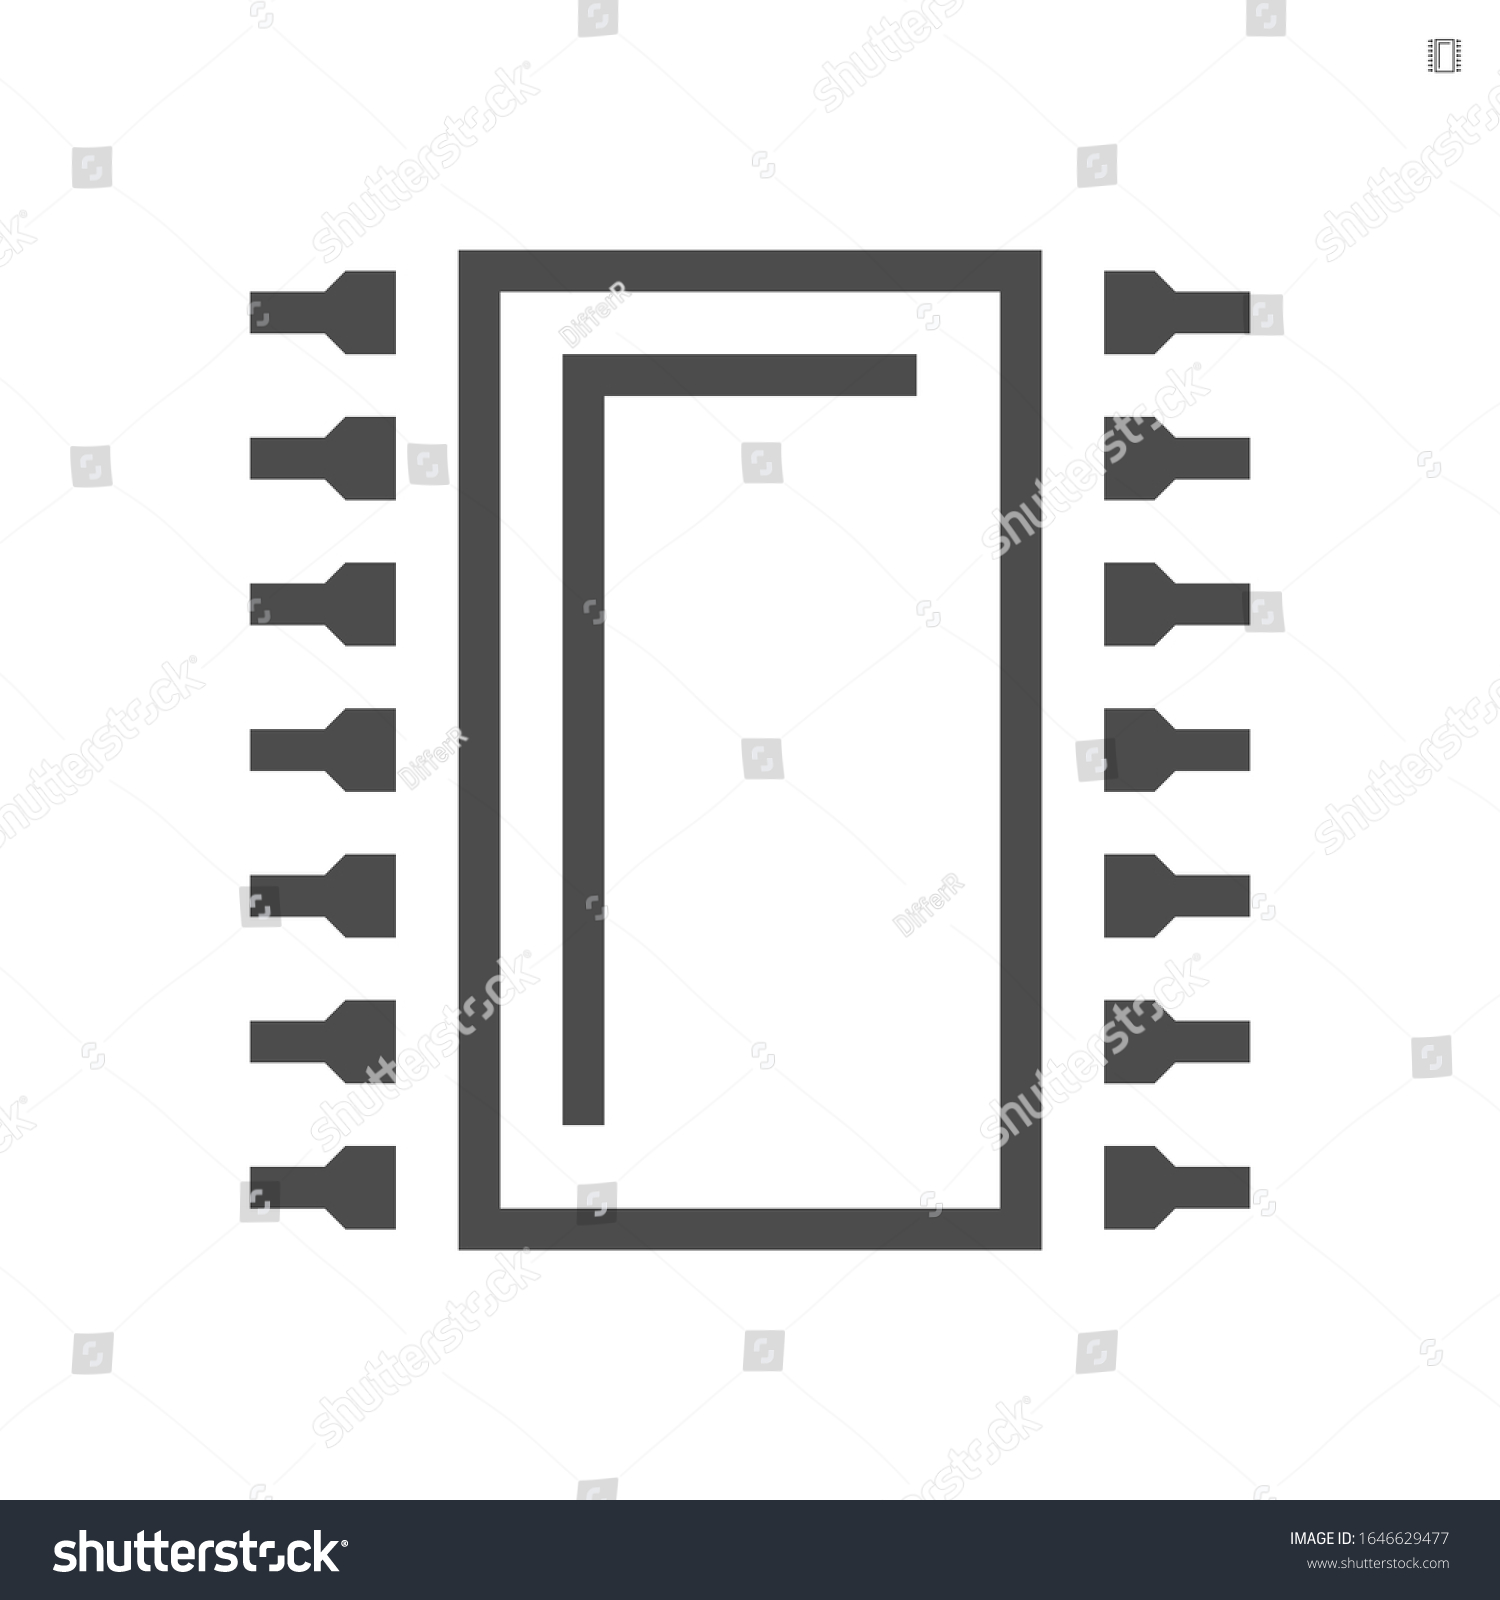 SVG of Microchip processor vector icon design on white background. svg